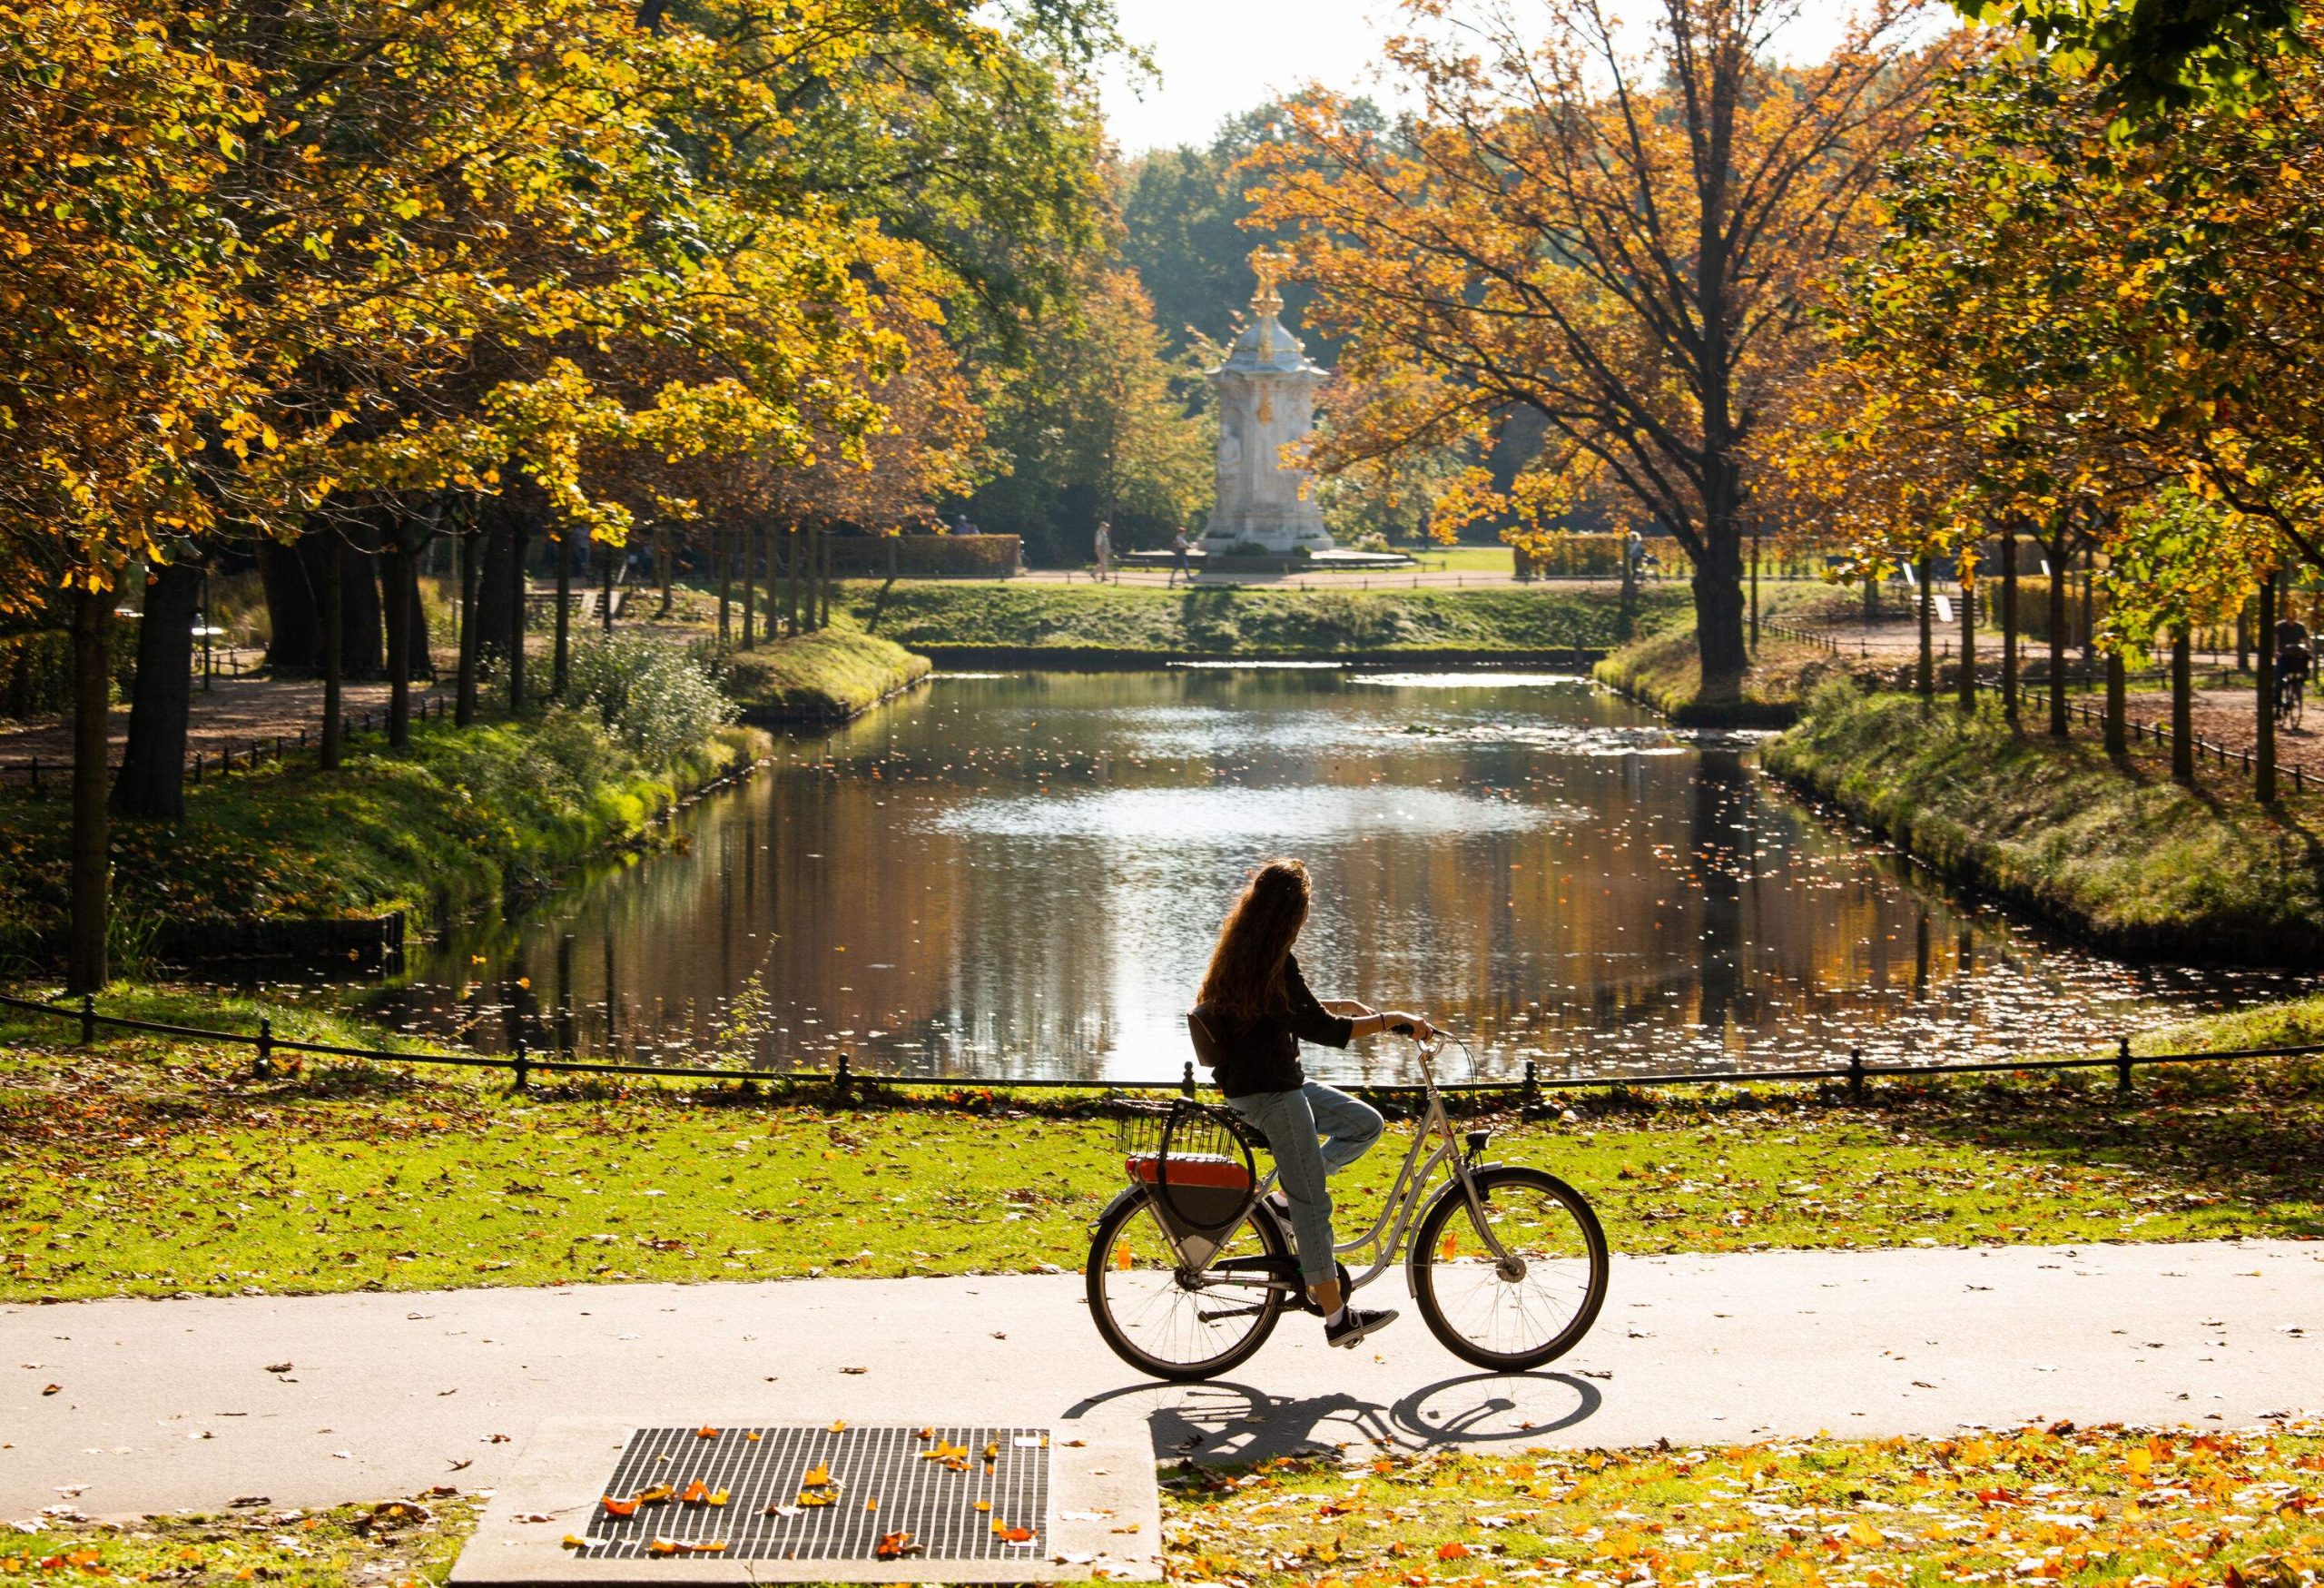 A small pond surrounded by lush foliage and a woman cycling along the park's paved trails.